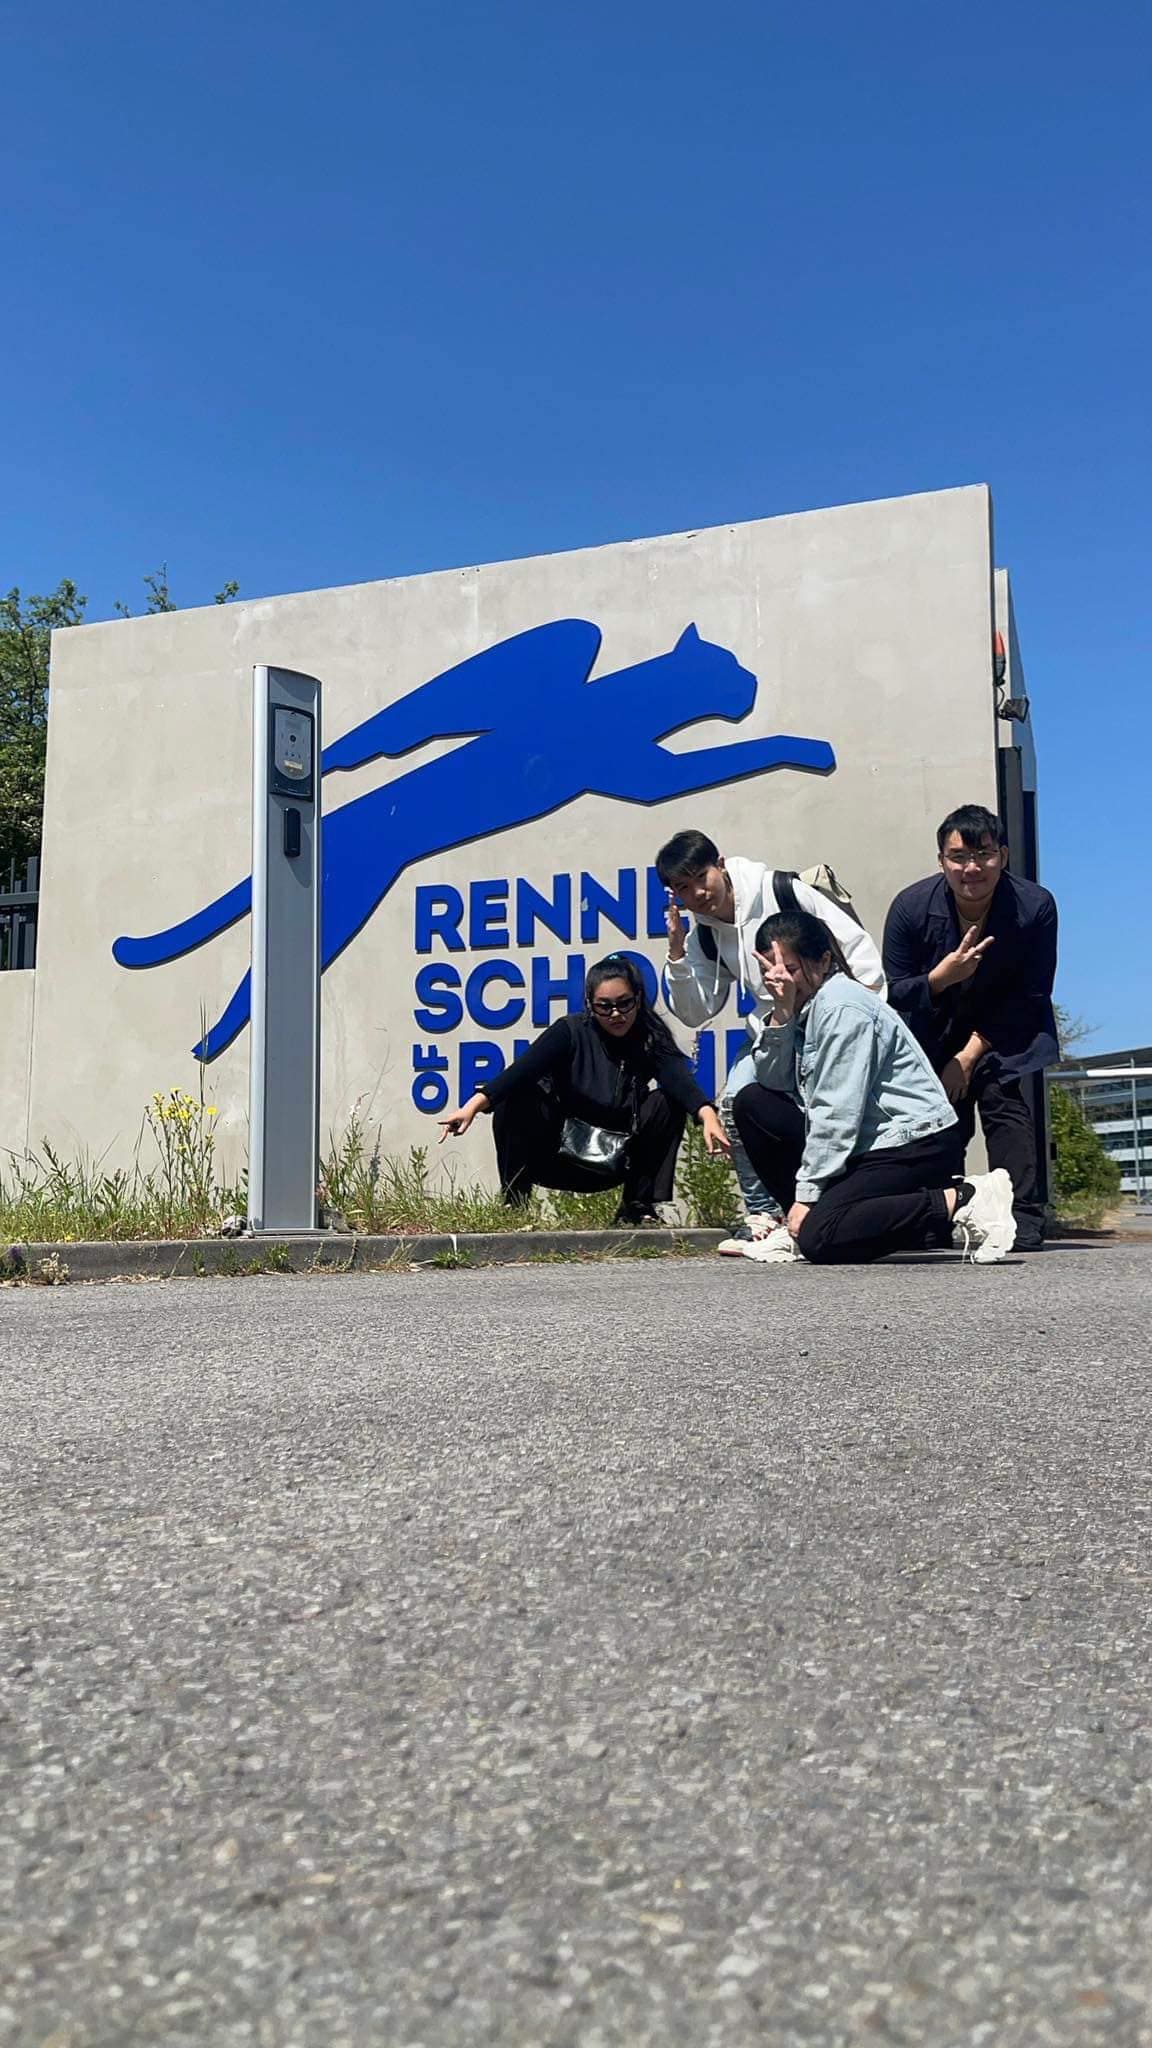 UTCC iSM students are attending the Consumer Behavior short summer course at Rennes Business School, France.